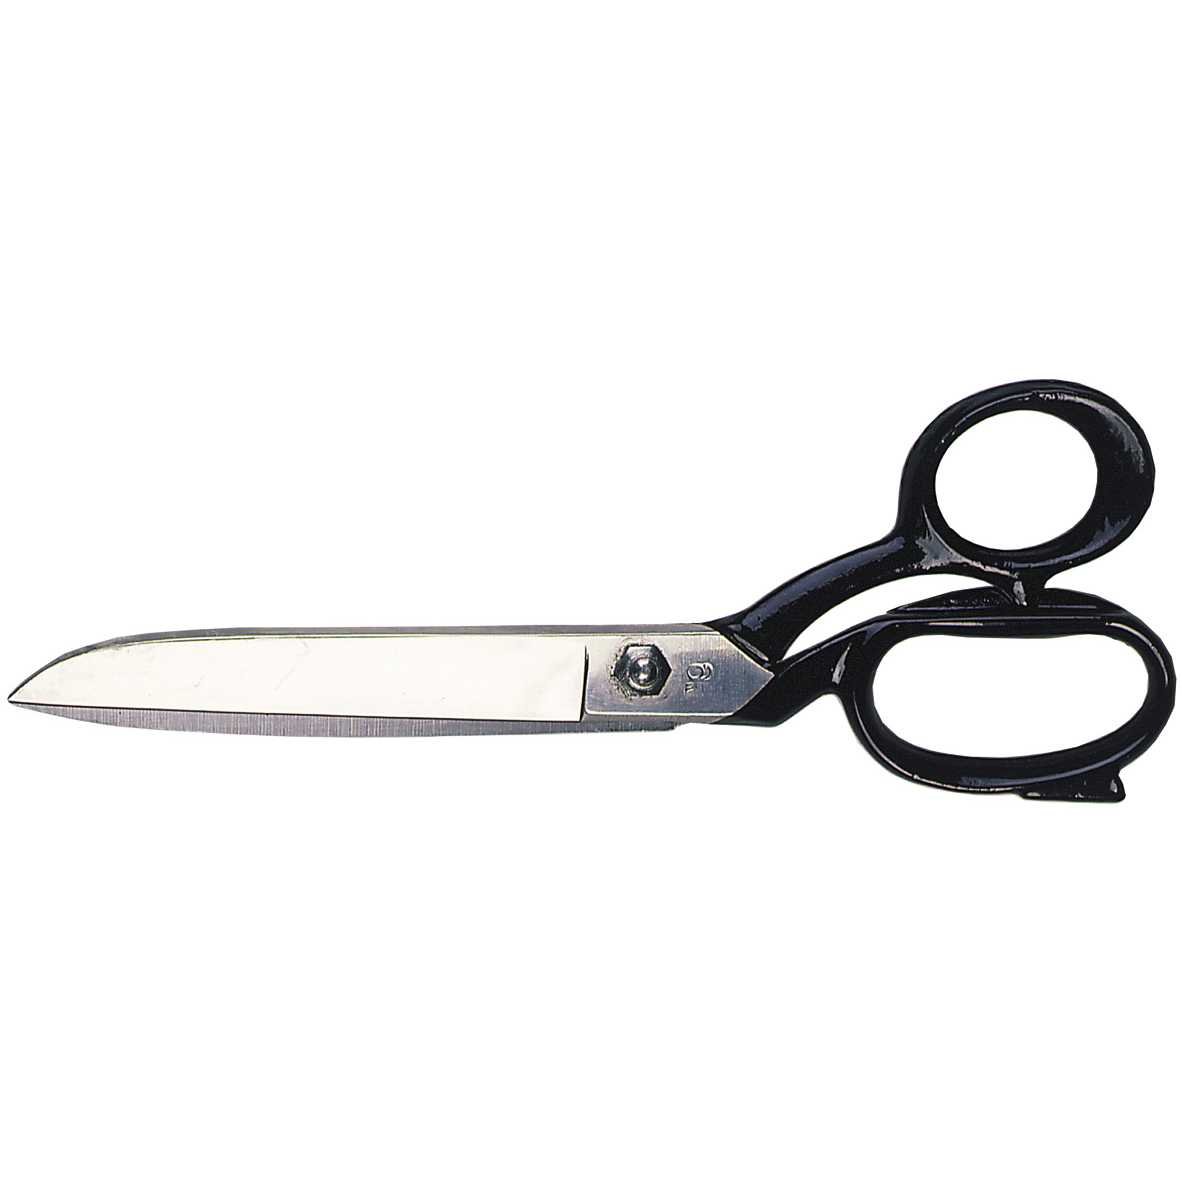 Industrial and professional shears D860-250